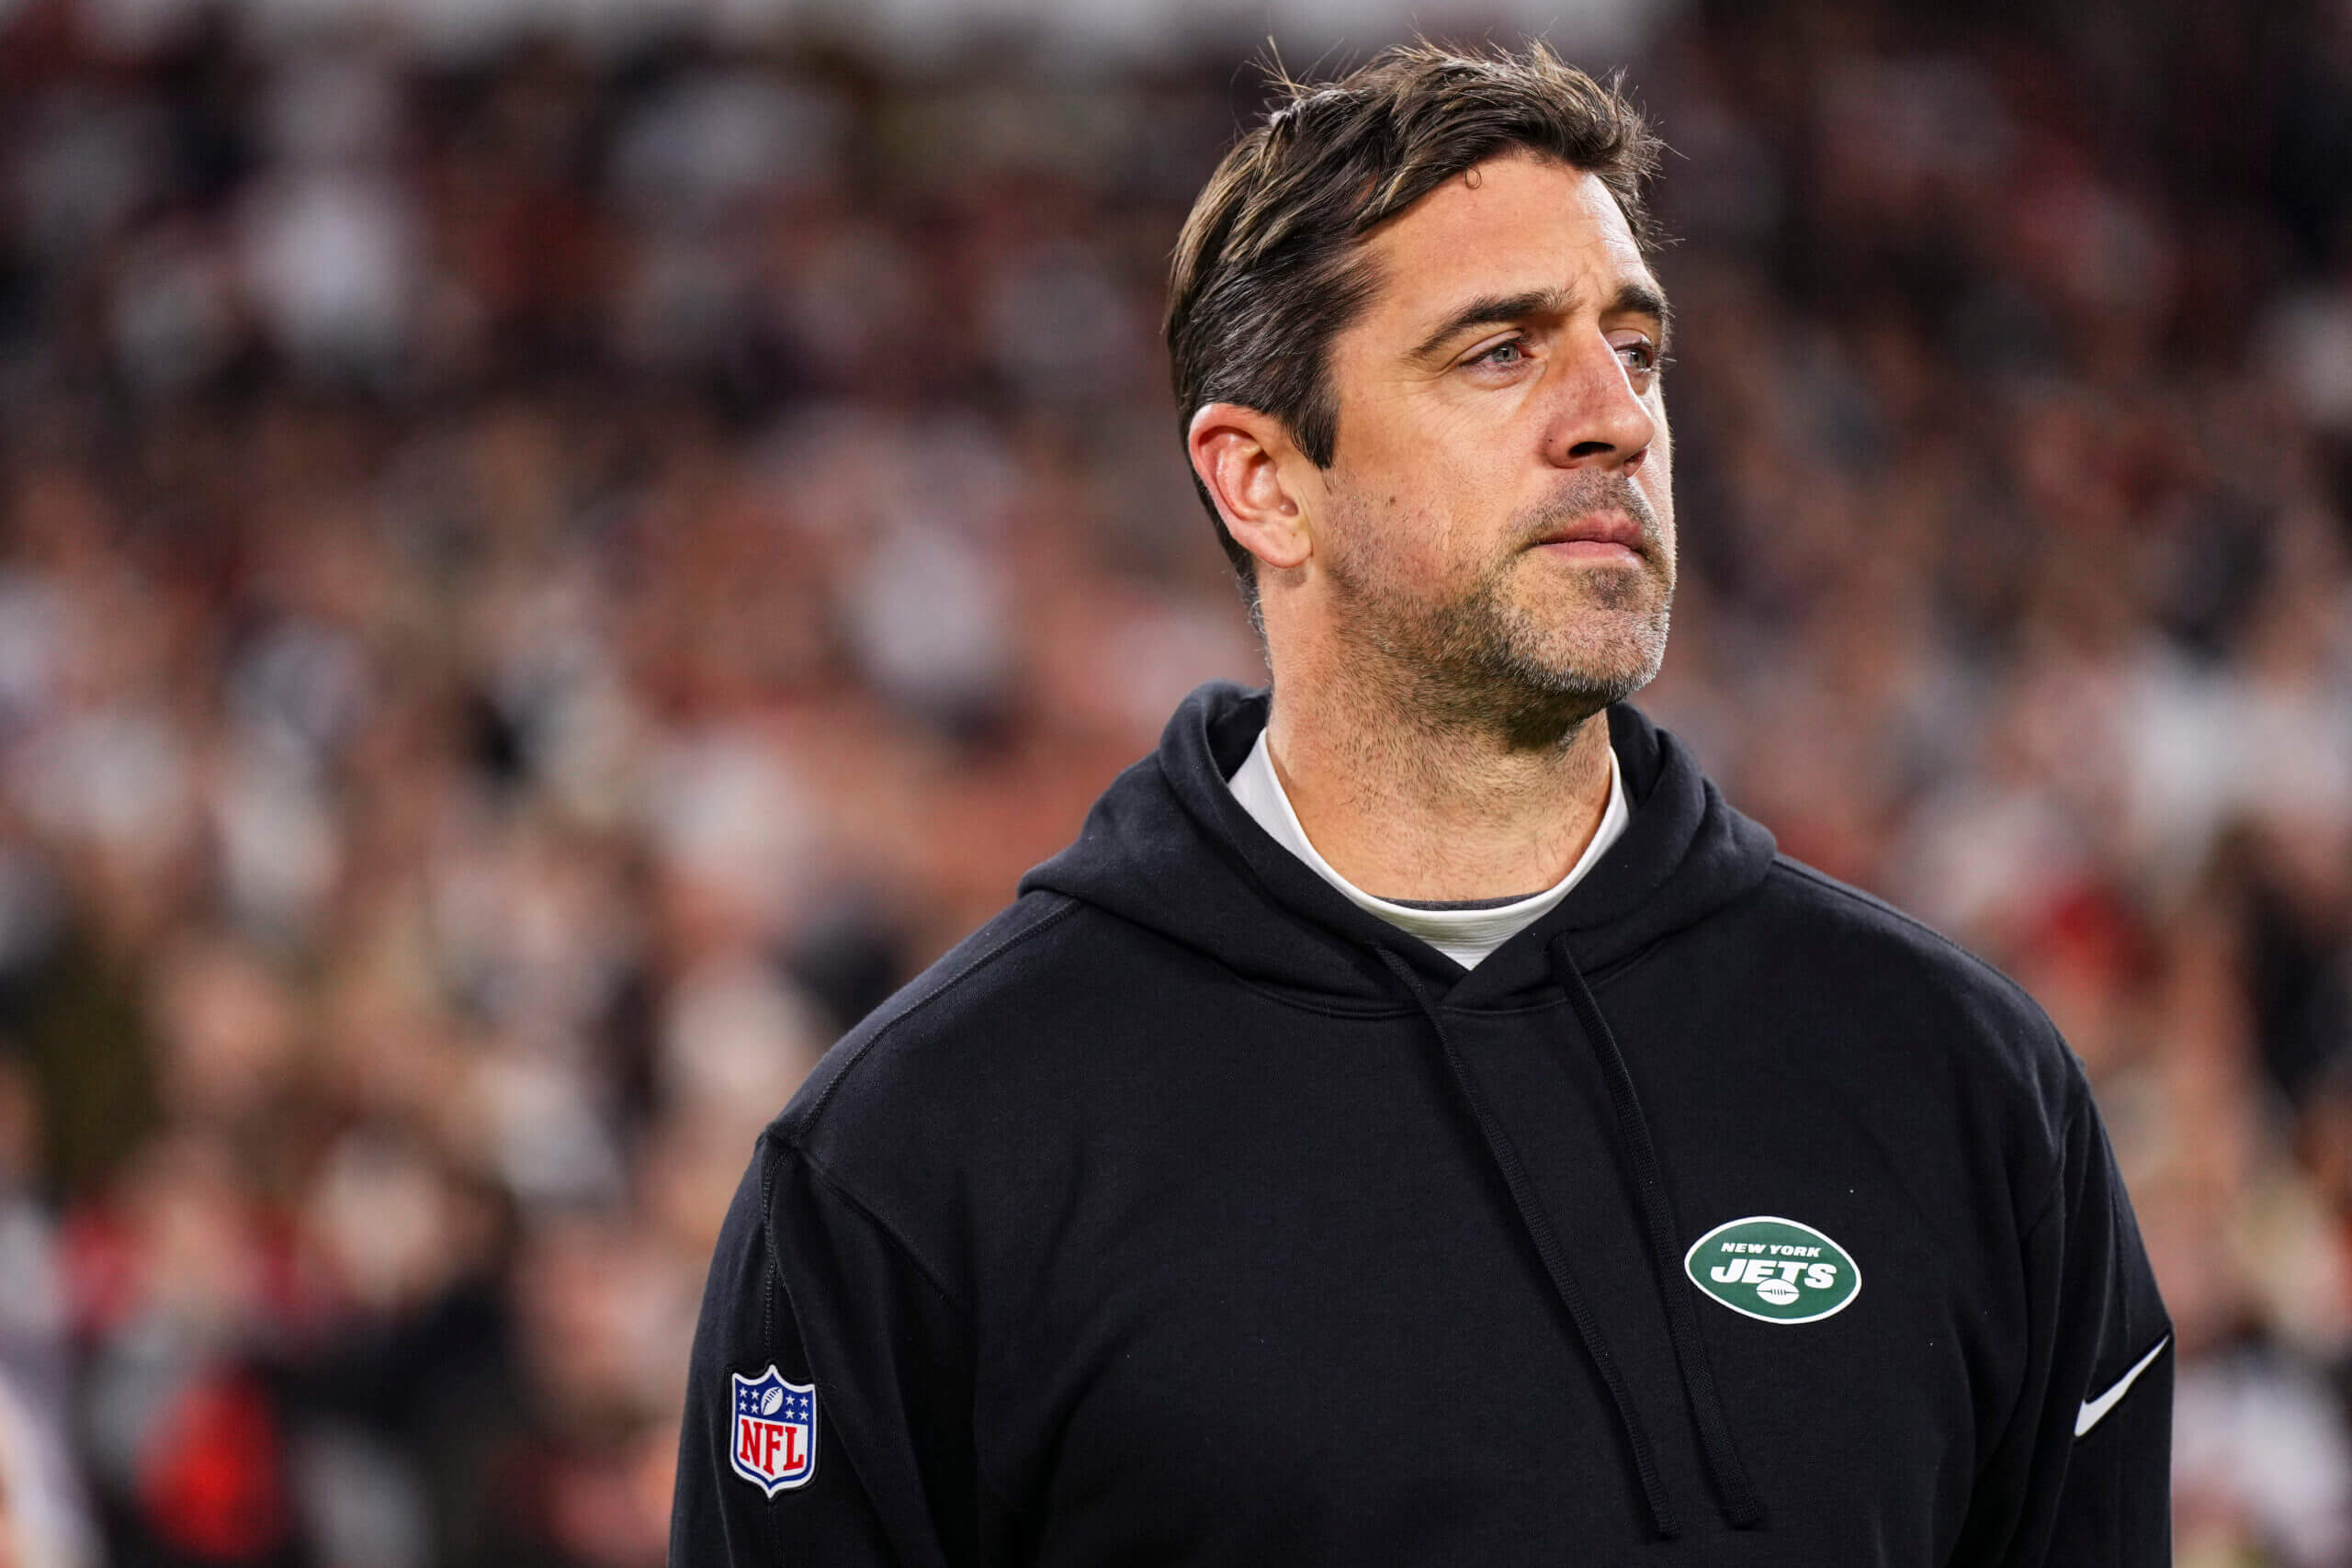 Rodgers 'doing everything' during Jets OTAs